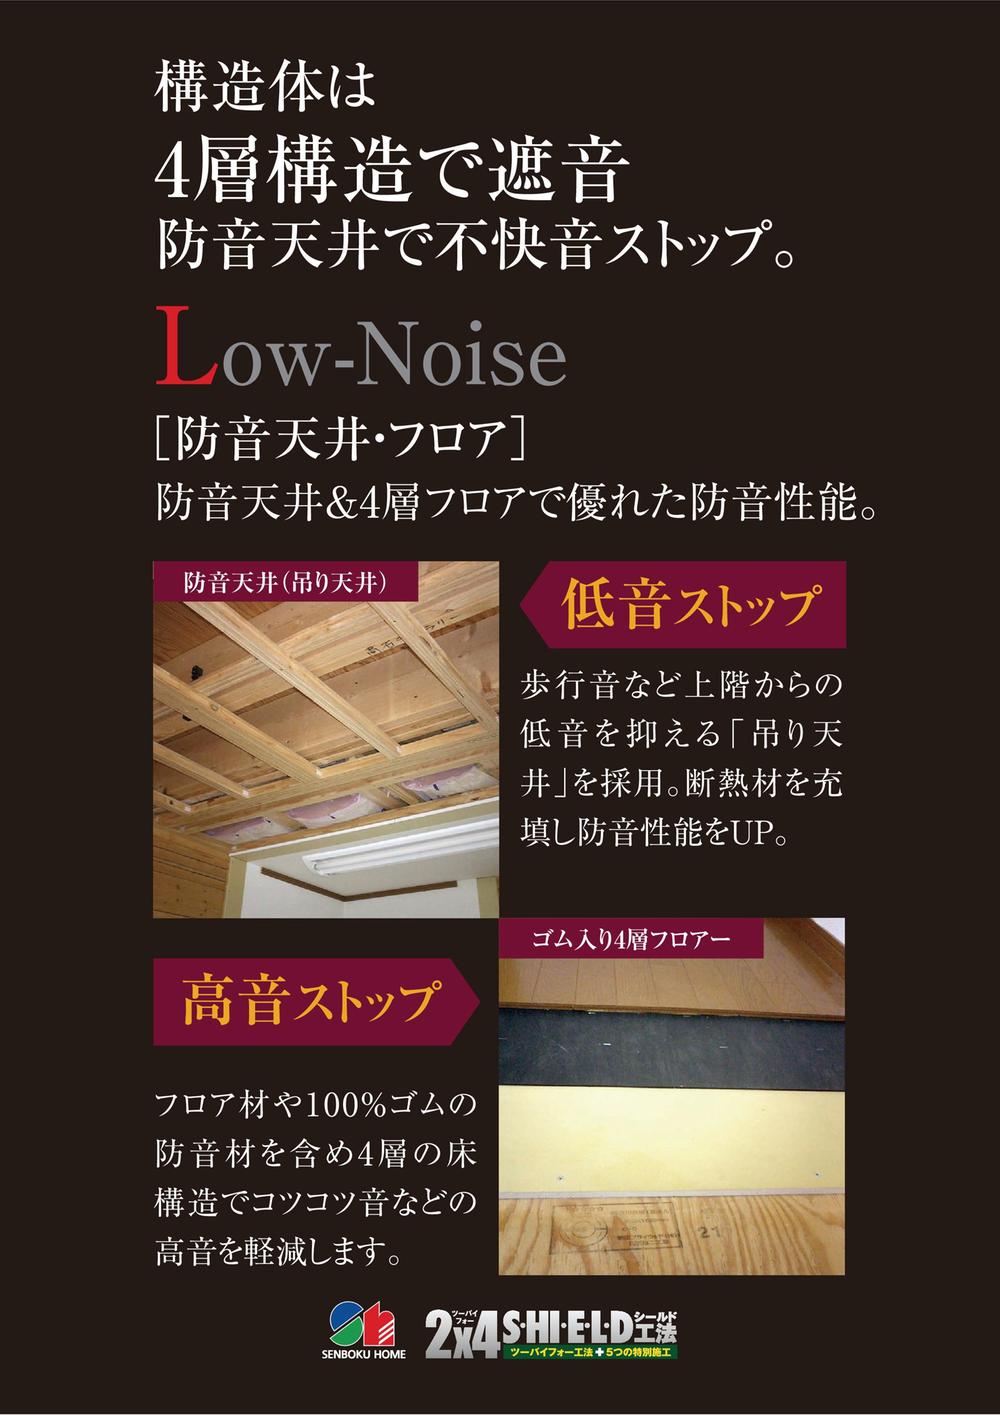 Construction ・ Construction method ・ specification. Soundproofed